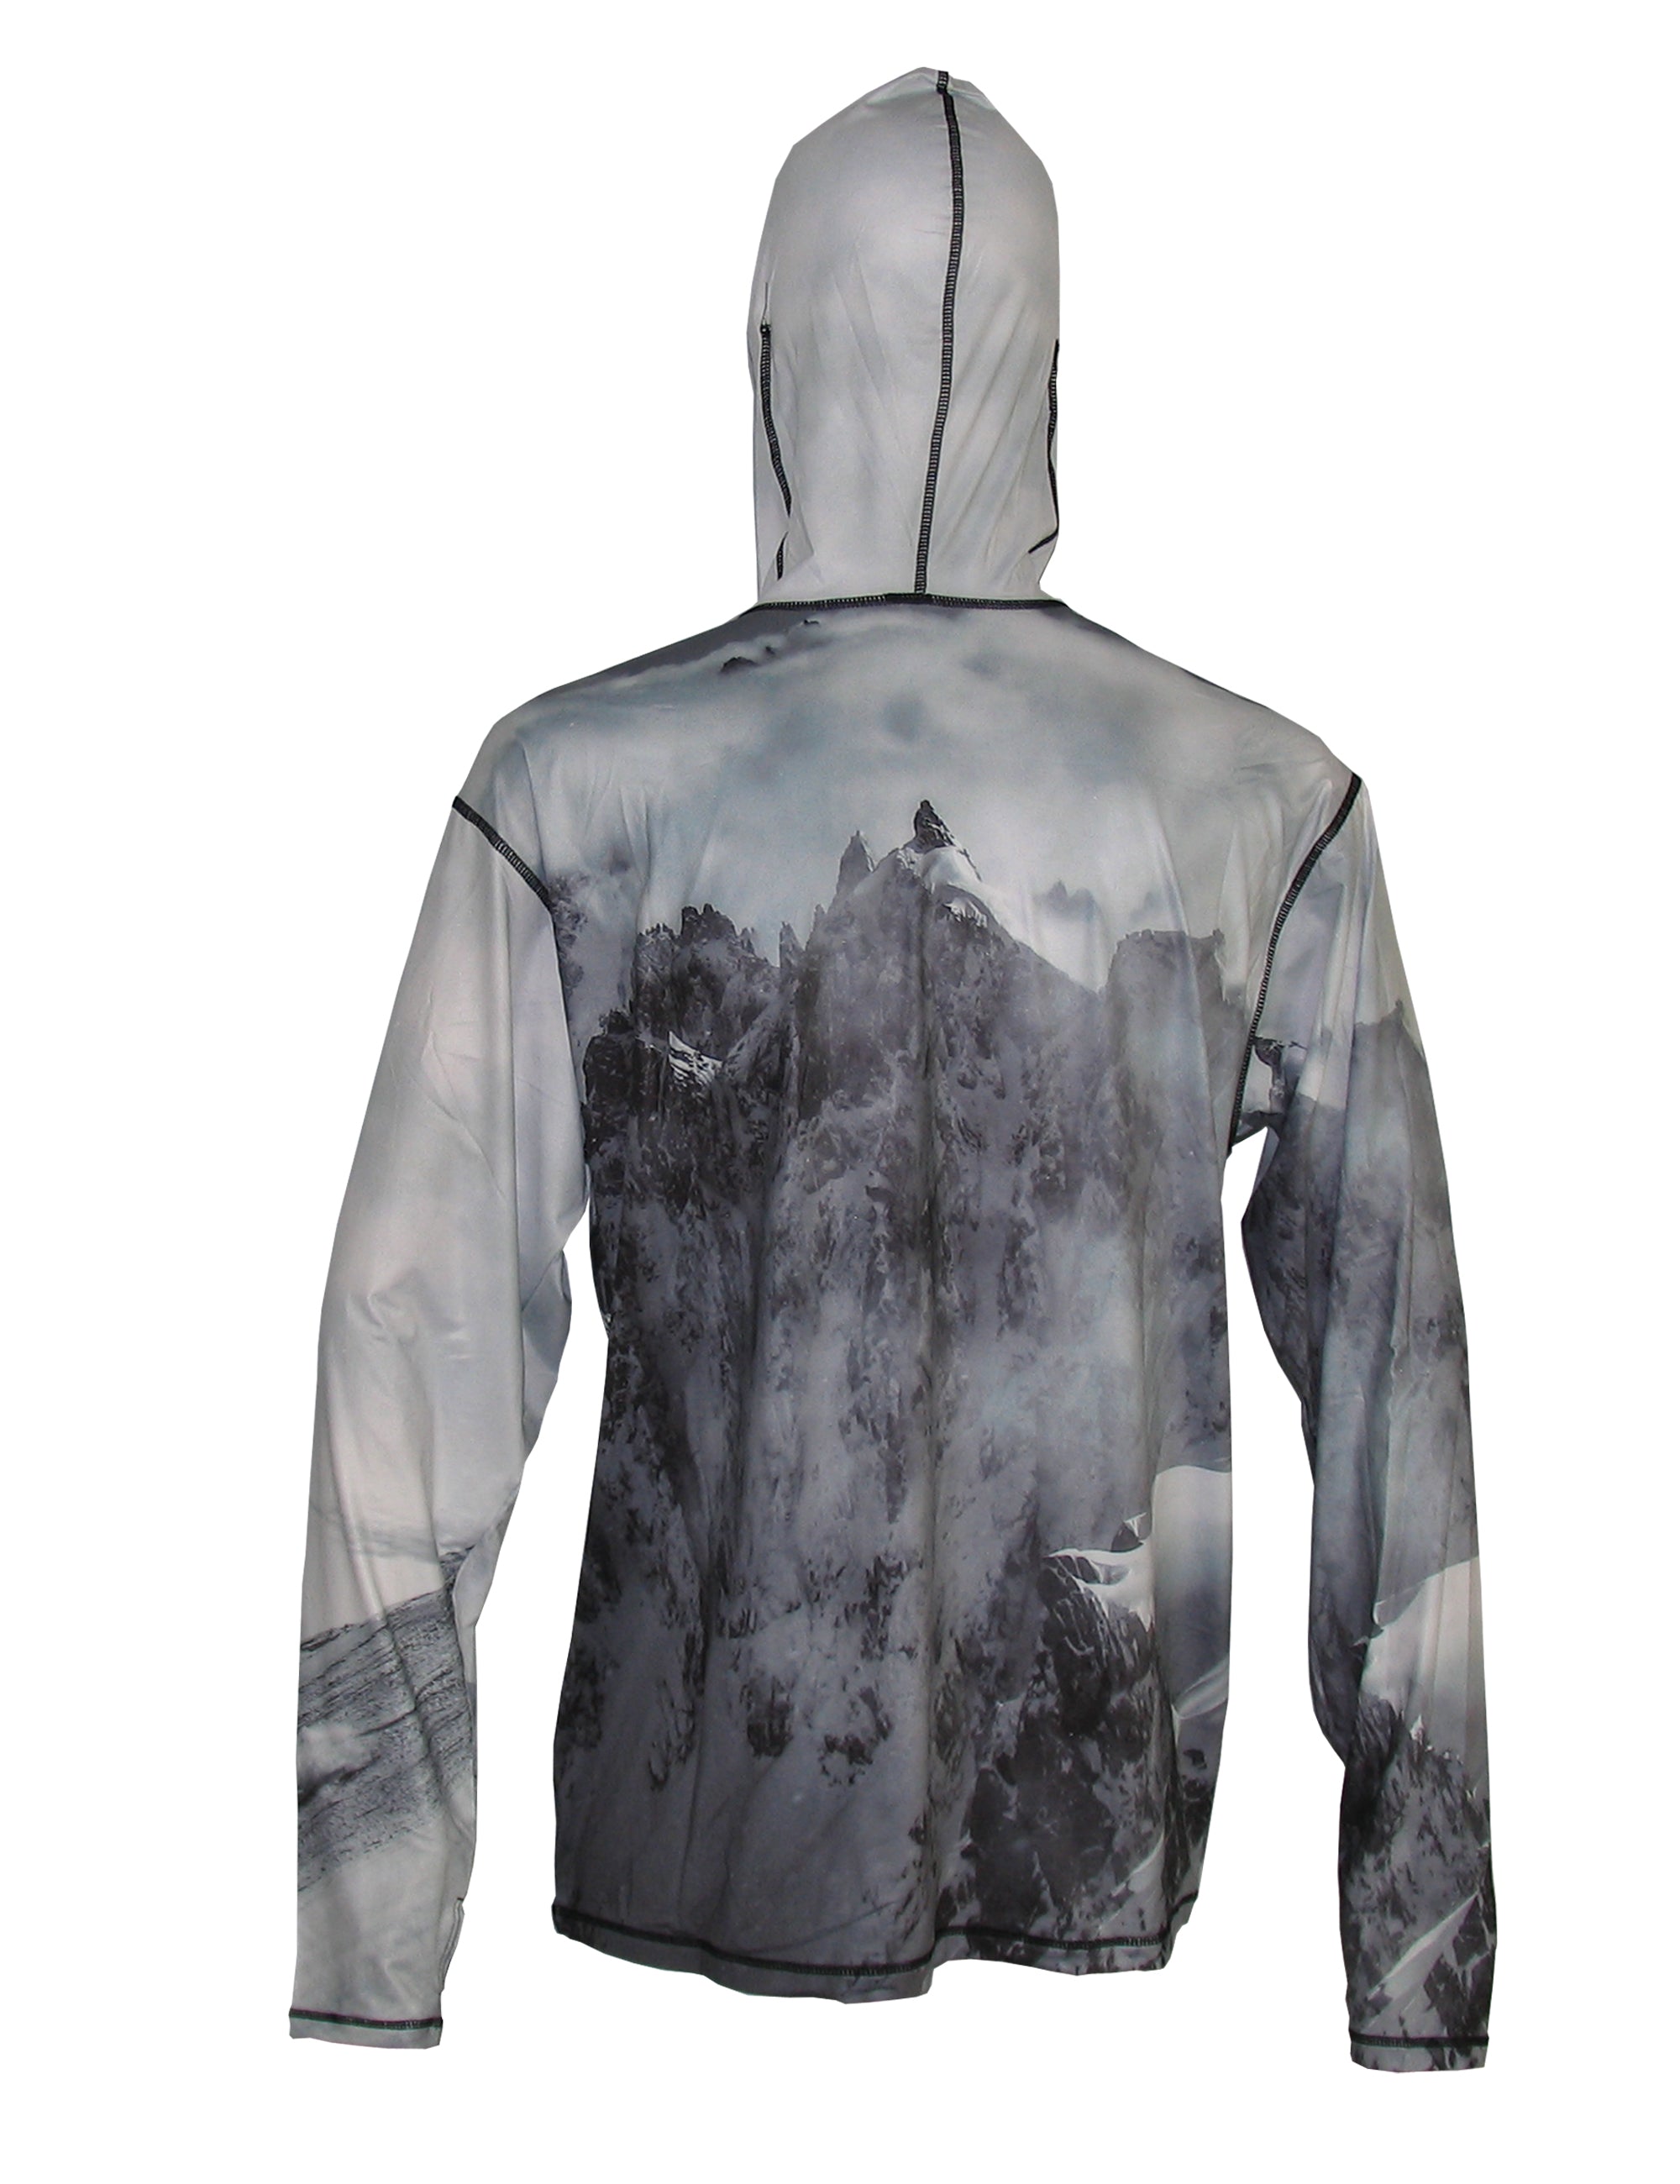 Jagged Edge Mountain Graphic Hoodie Outdoor Clothing and Apparel